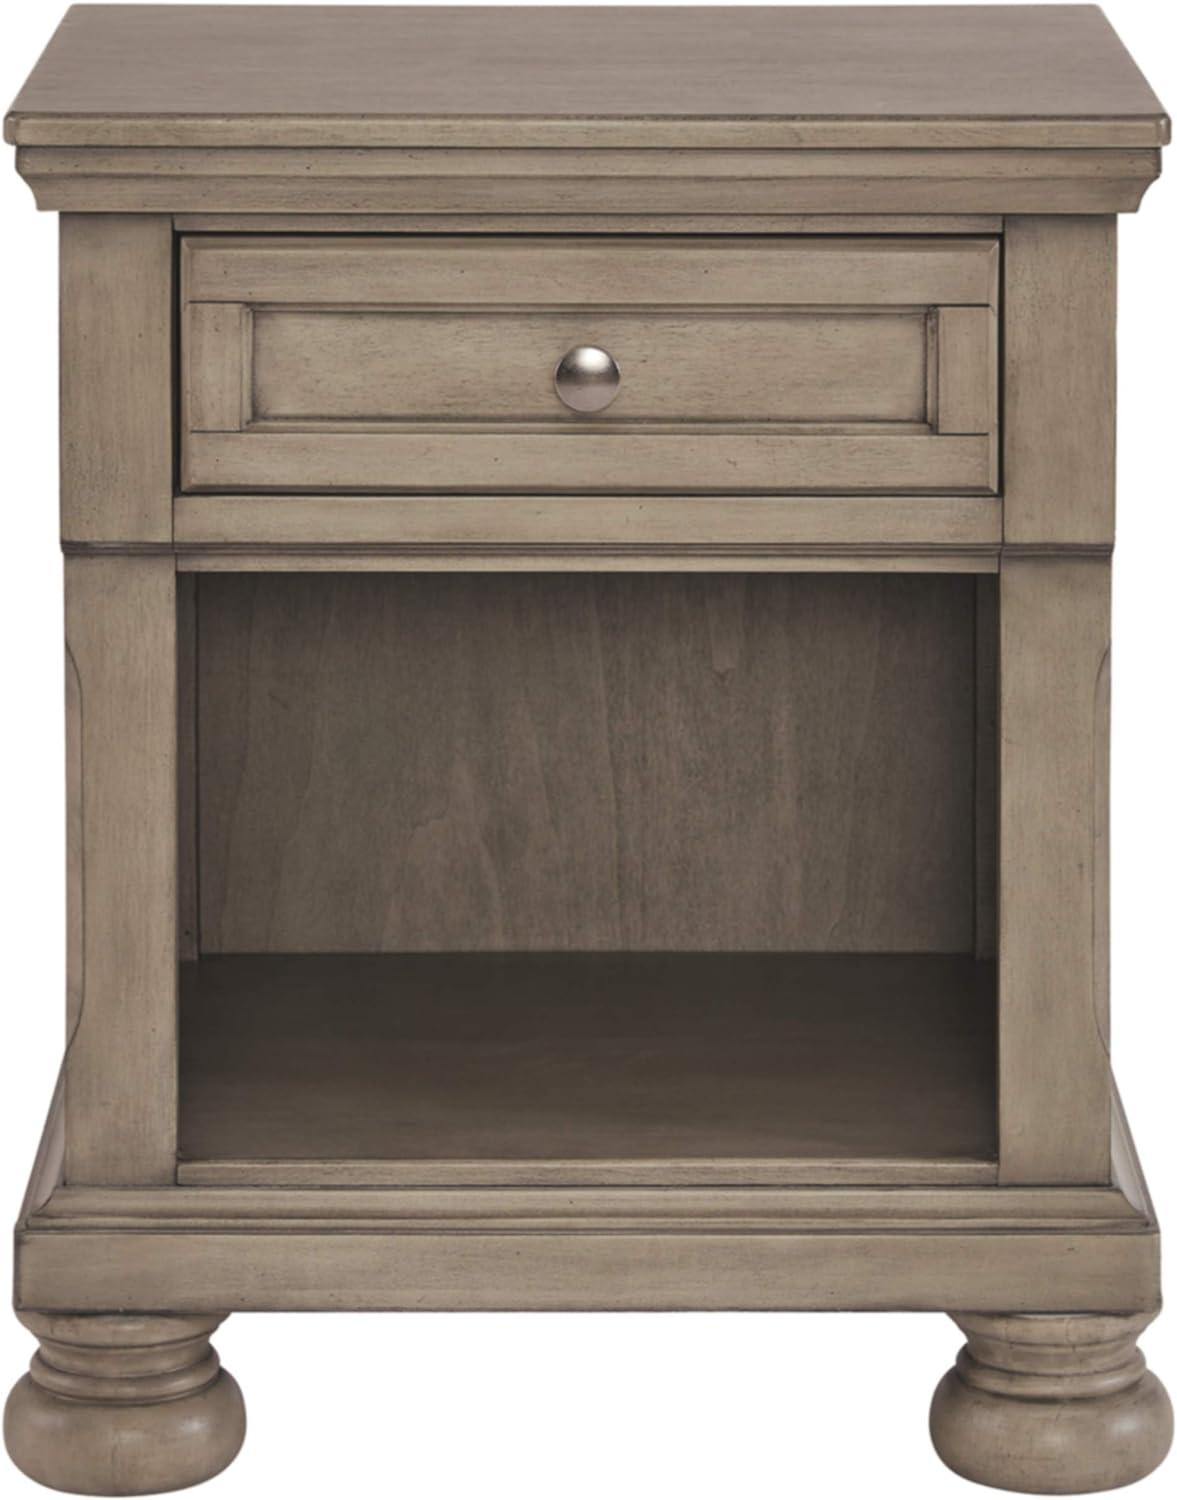 Lettner Traditional Light Gray 1-Drawer Nightstand with Bun Feet